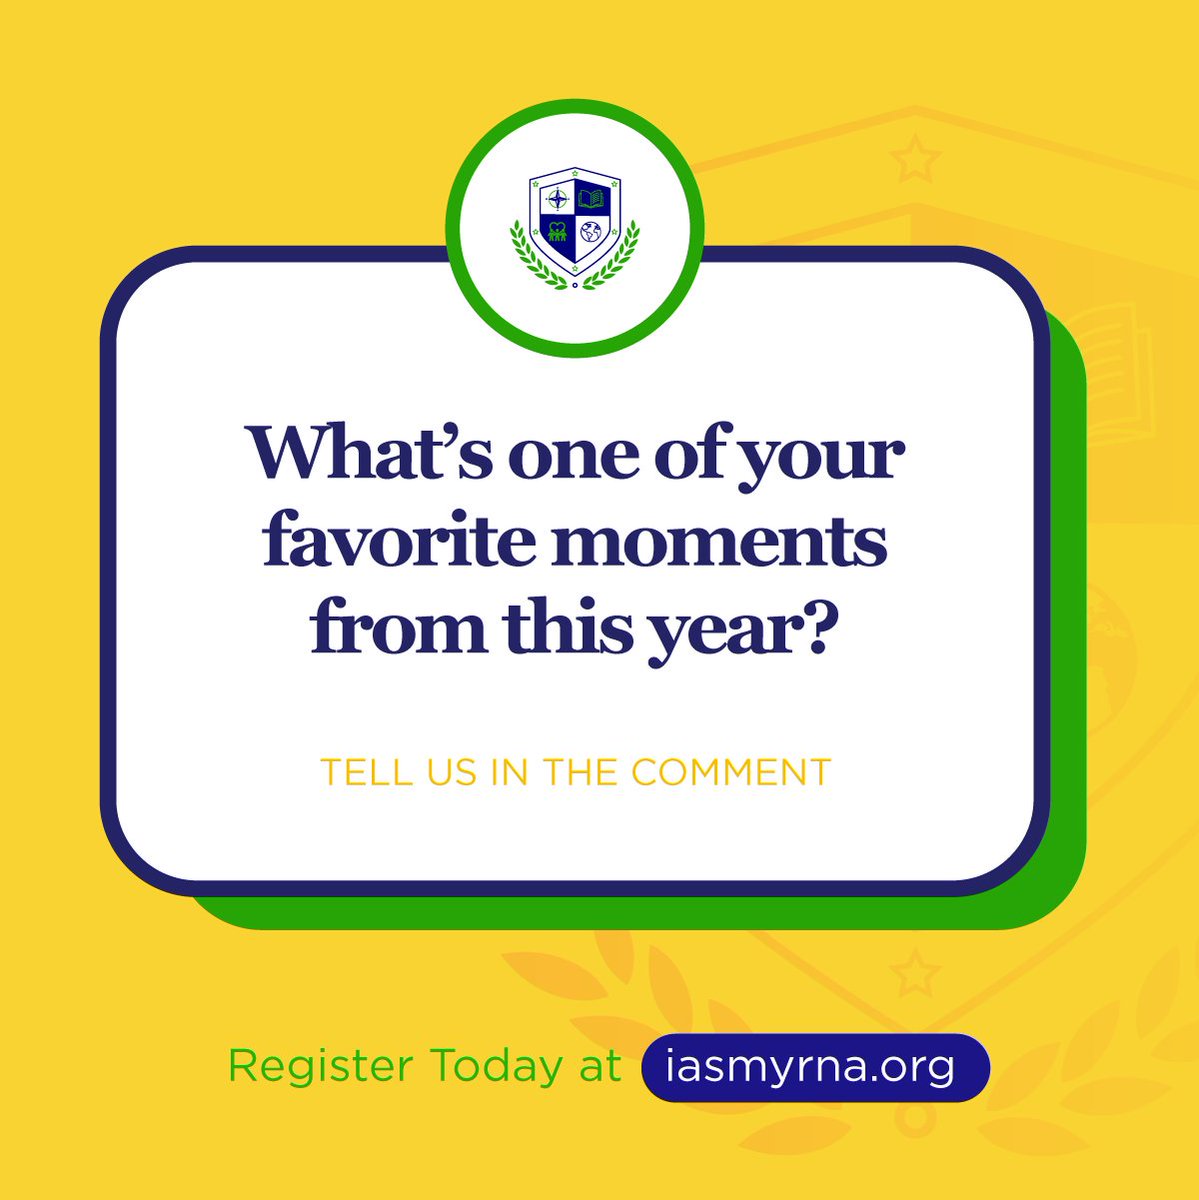 As this year is winding down, we'd love to know what's one of your favorite moments. 

#iasmyrna #charterschool #tuitionfree #education #school #cobbcounty #smyrna #mariettacity